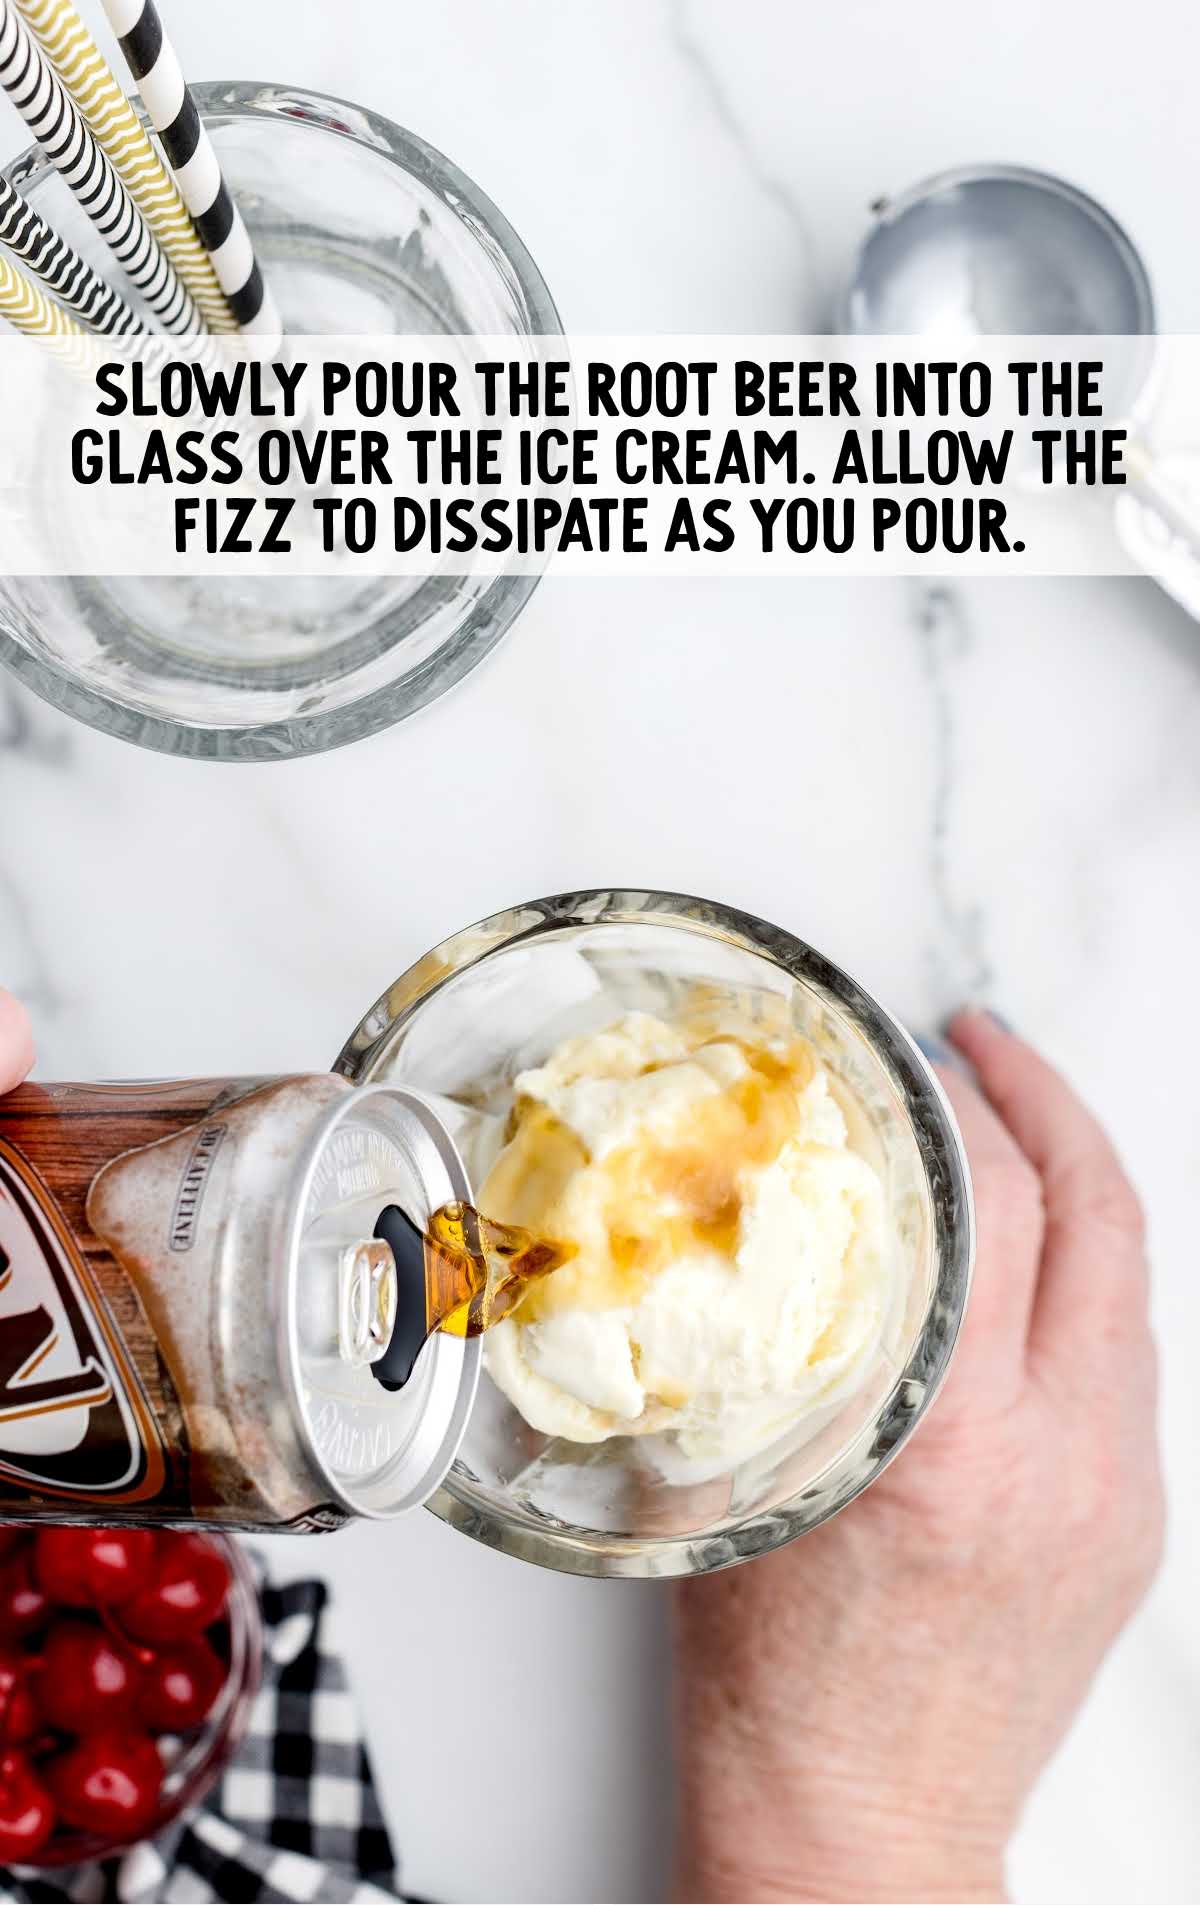 root beer poured into the ice cream